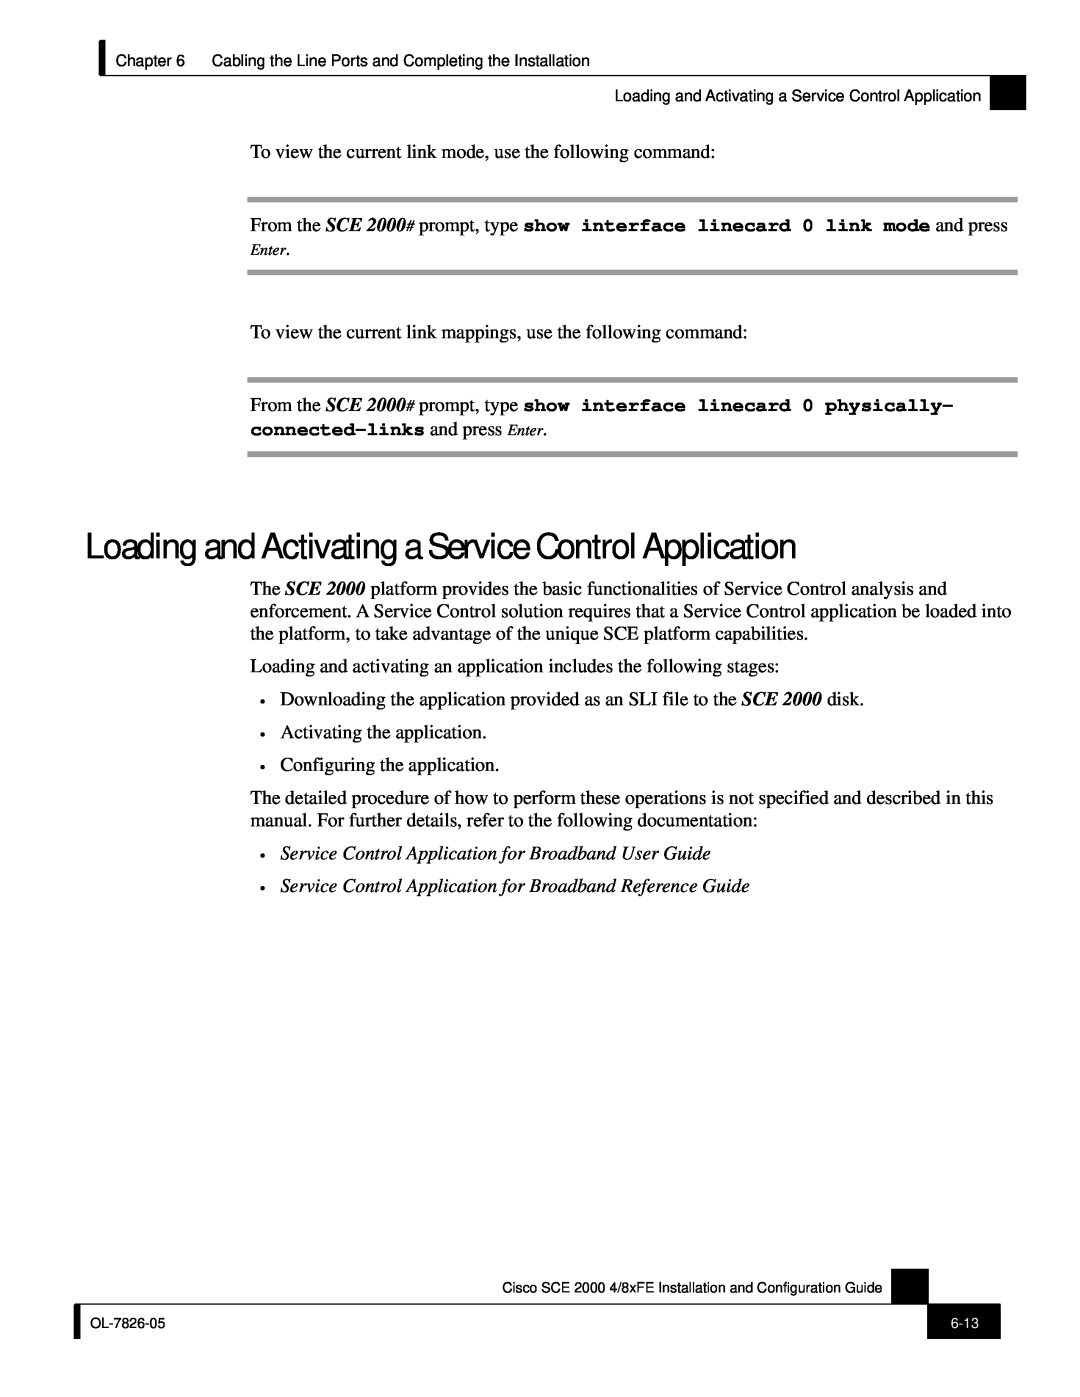 Cisco Systems SCE 2000 4/8xFE manual Loading and Activating a Service Control Application 